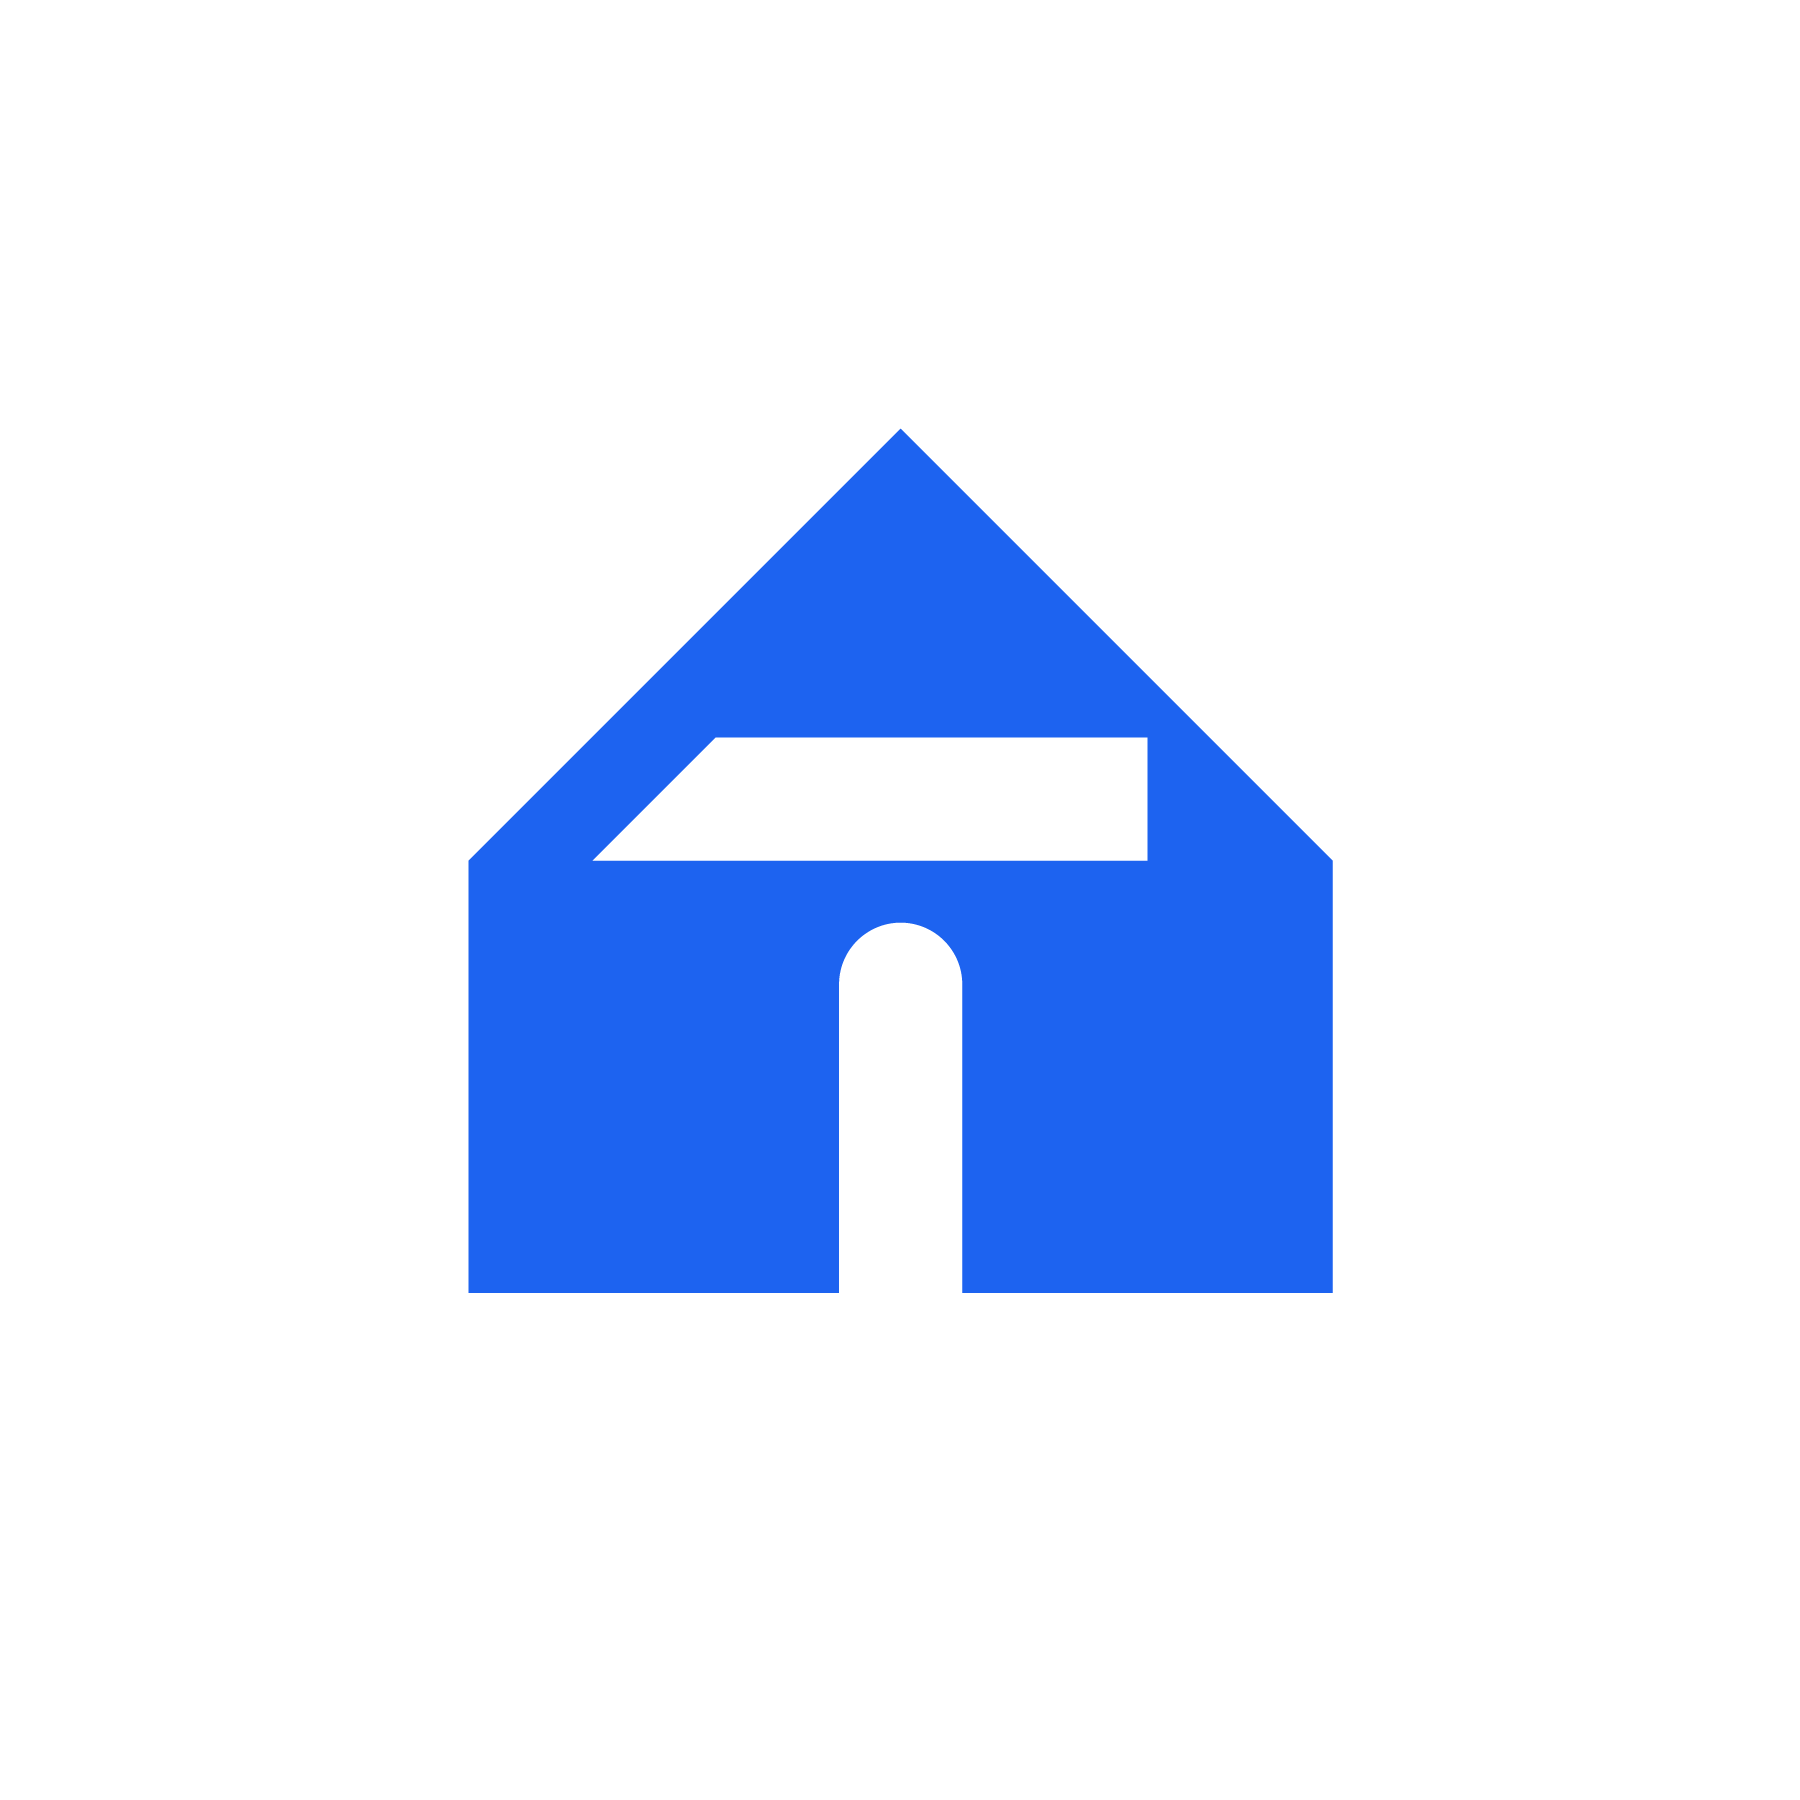 House Hammer Logo: Minimalistic house icon with hammer cutout inside